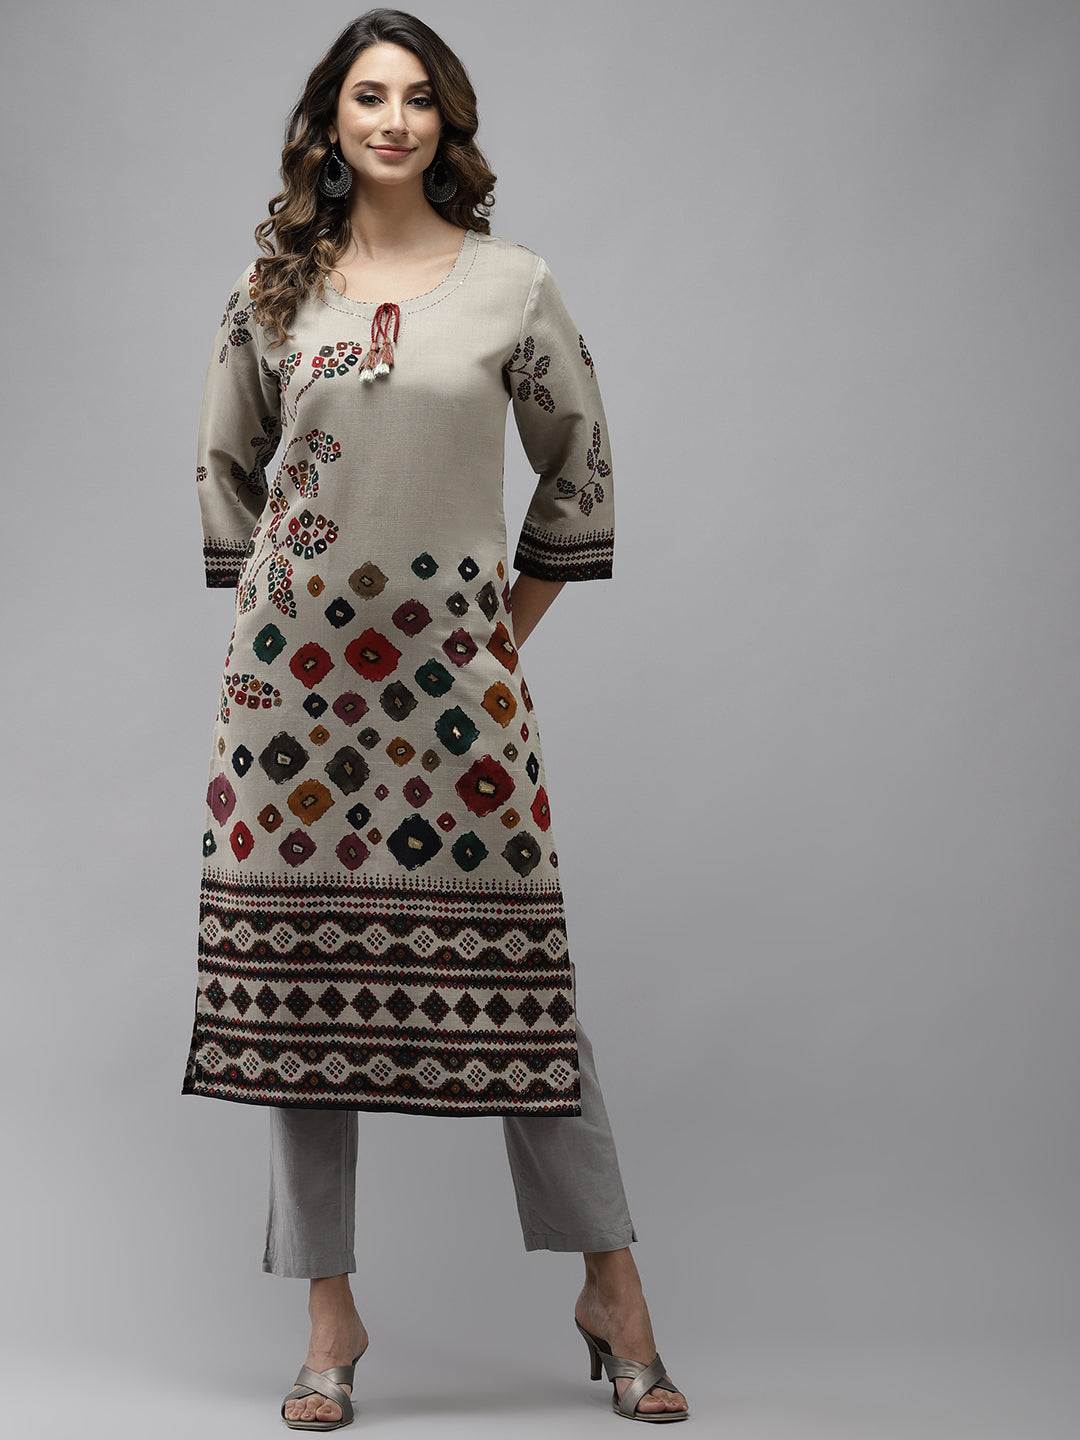 Trendy Kurti with Jeans | Top with Jeans for Girls | Kurti Jeans Design |  Kurti Design with Jeans | | Casual wear dress, Casual wear, Casual dress